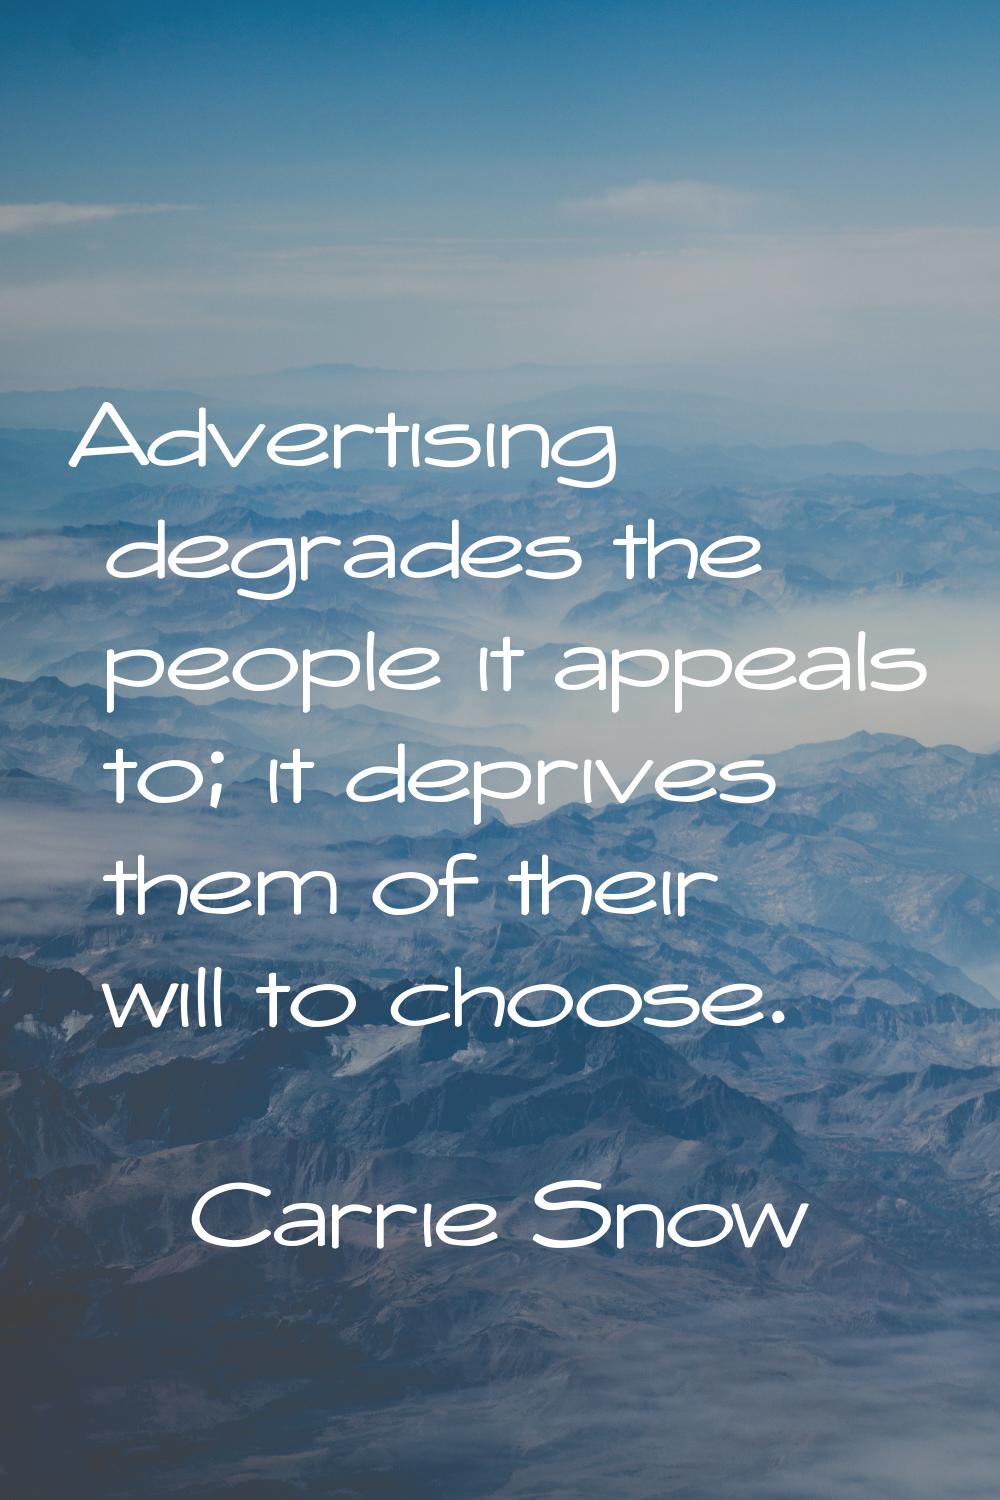 Advertising degrades the people it appeals to; it deprives them of their will to choose.